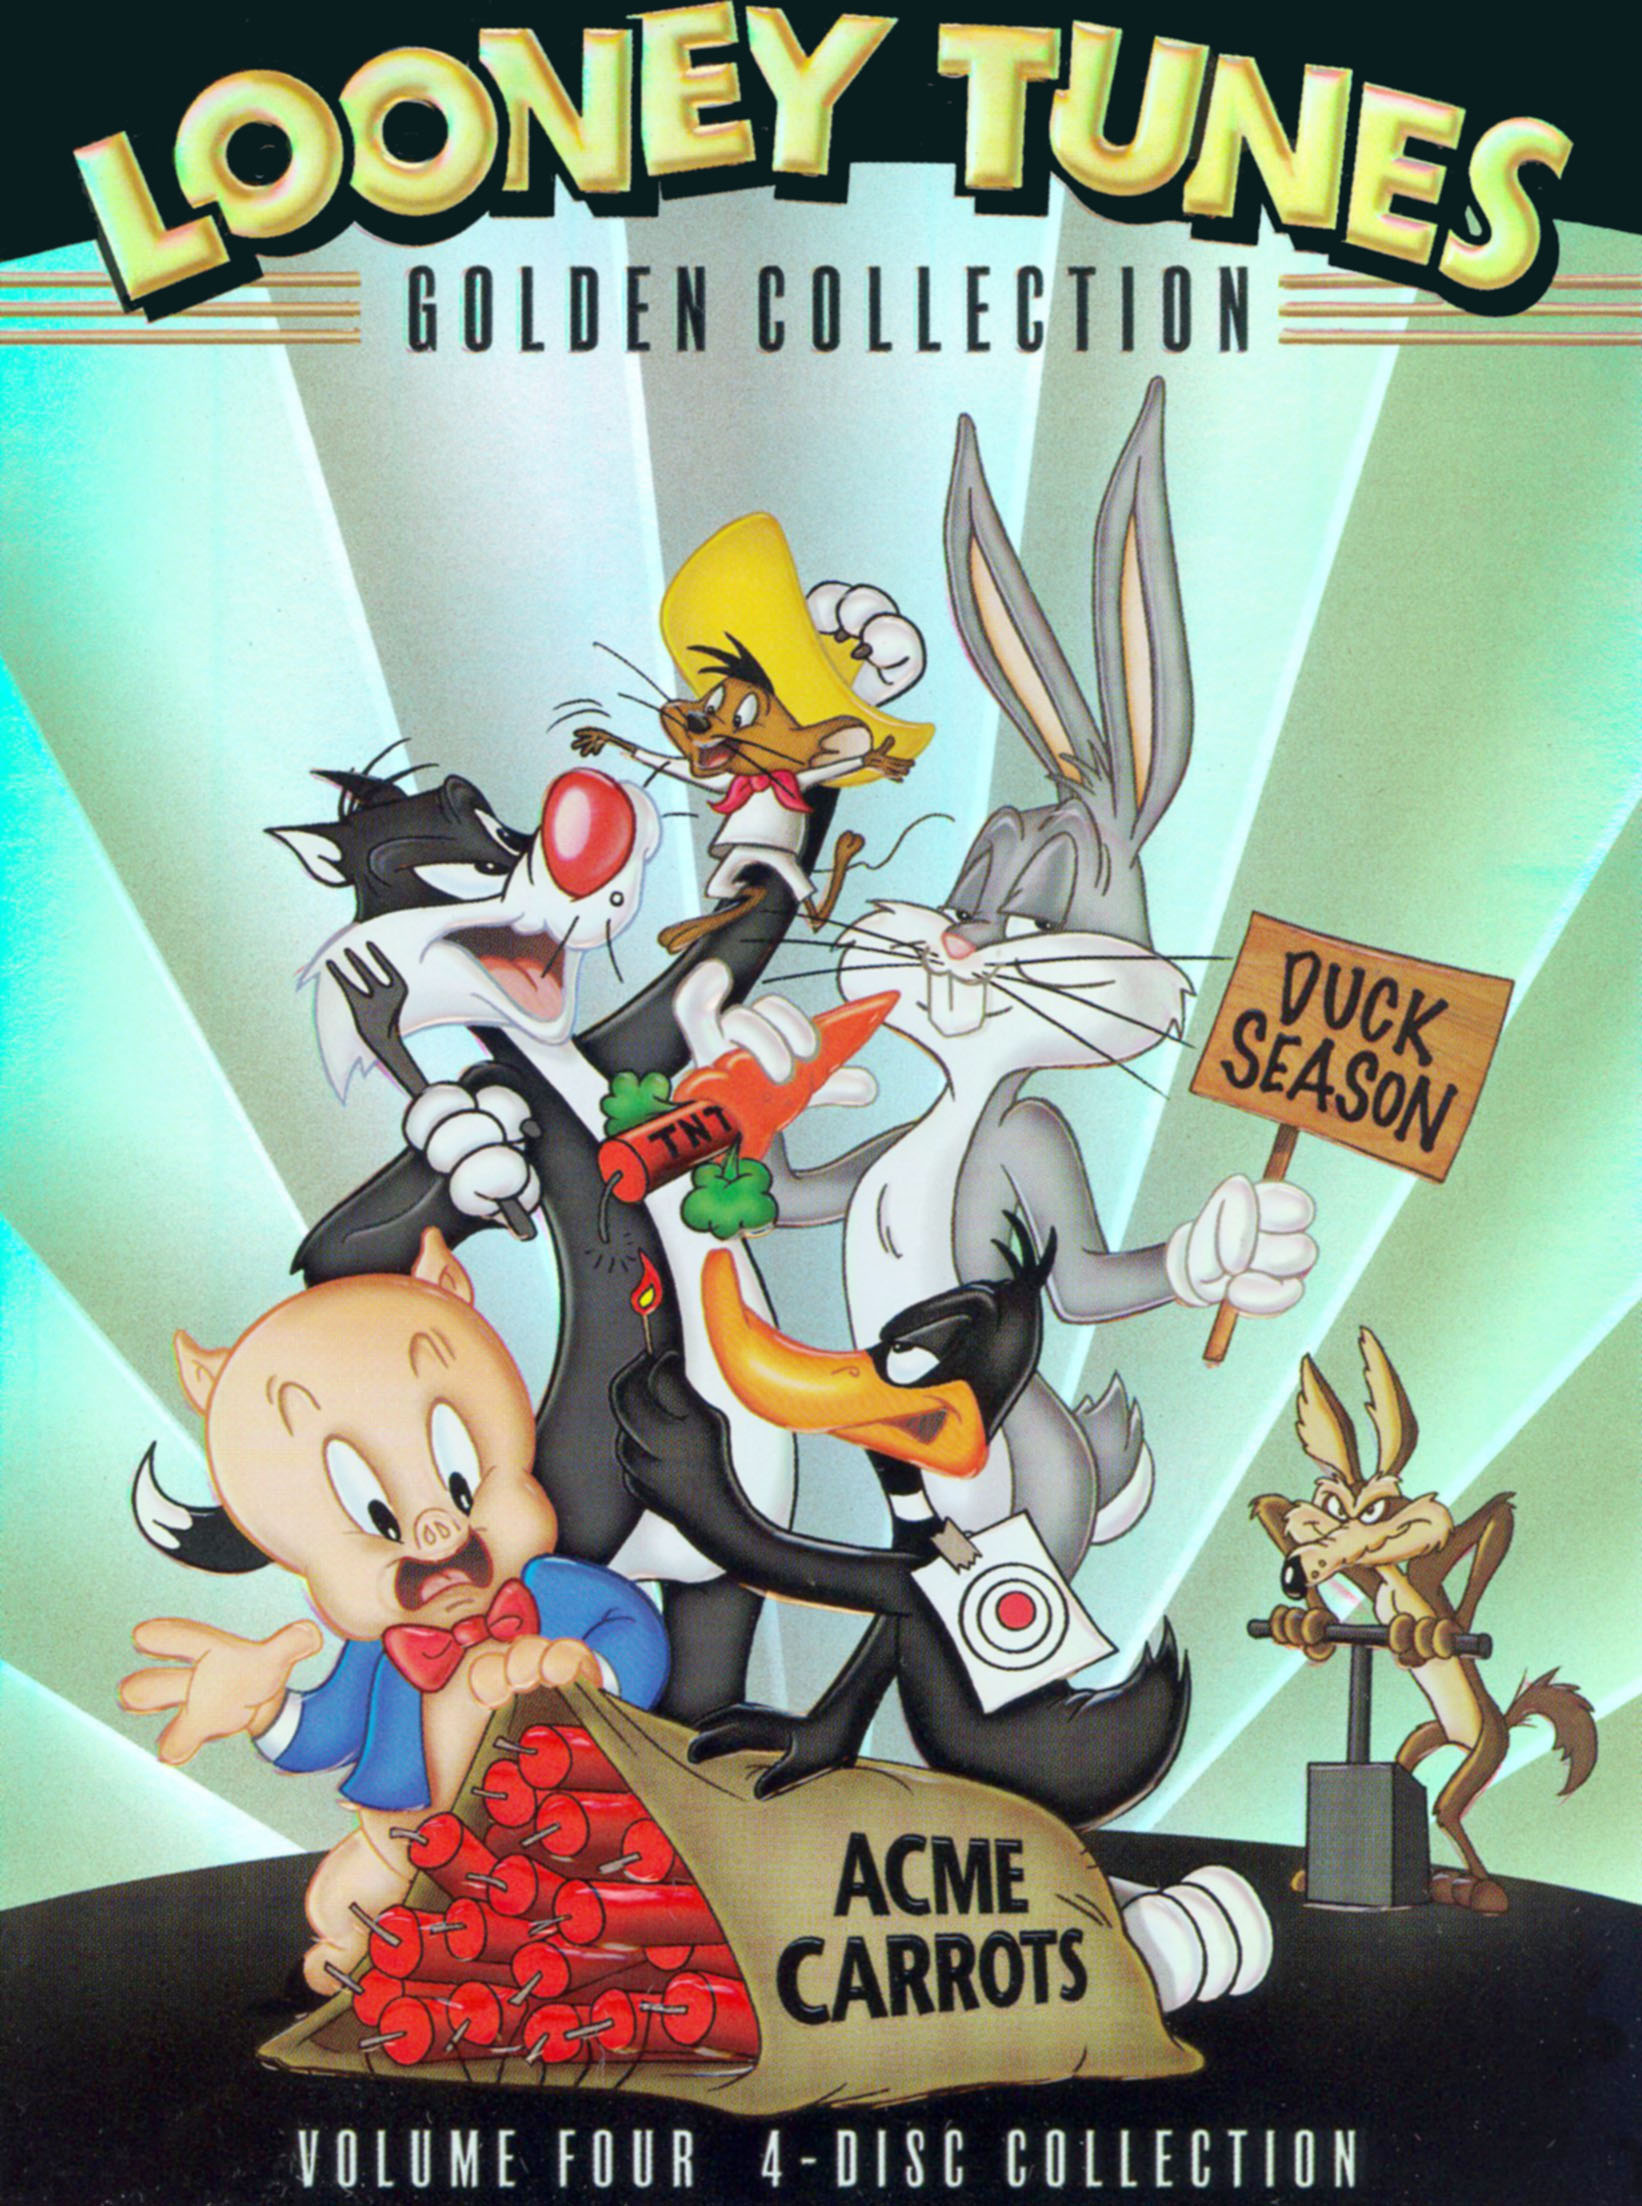 LOONEY TUNES Golden Collection Volume 3 DVD - 4 Disc Collection 12569688902